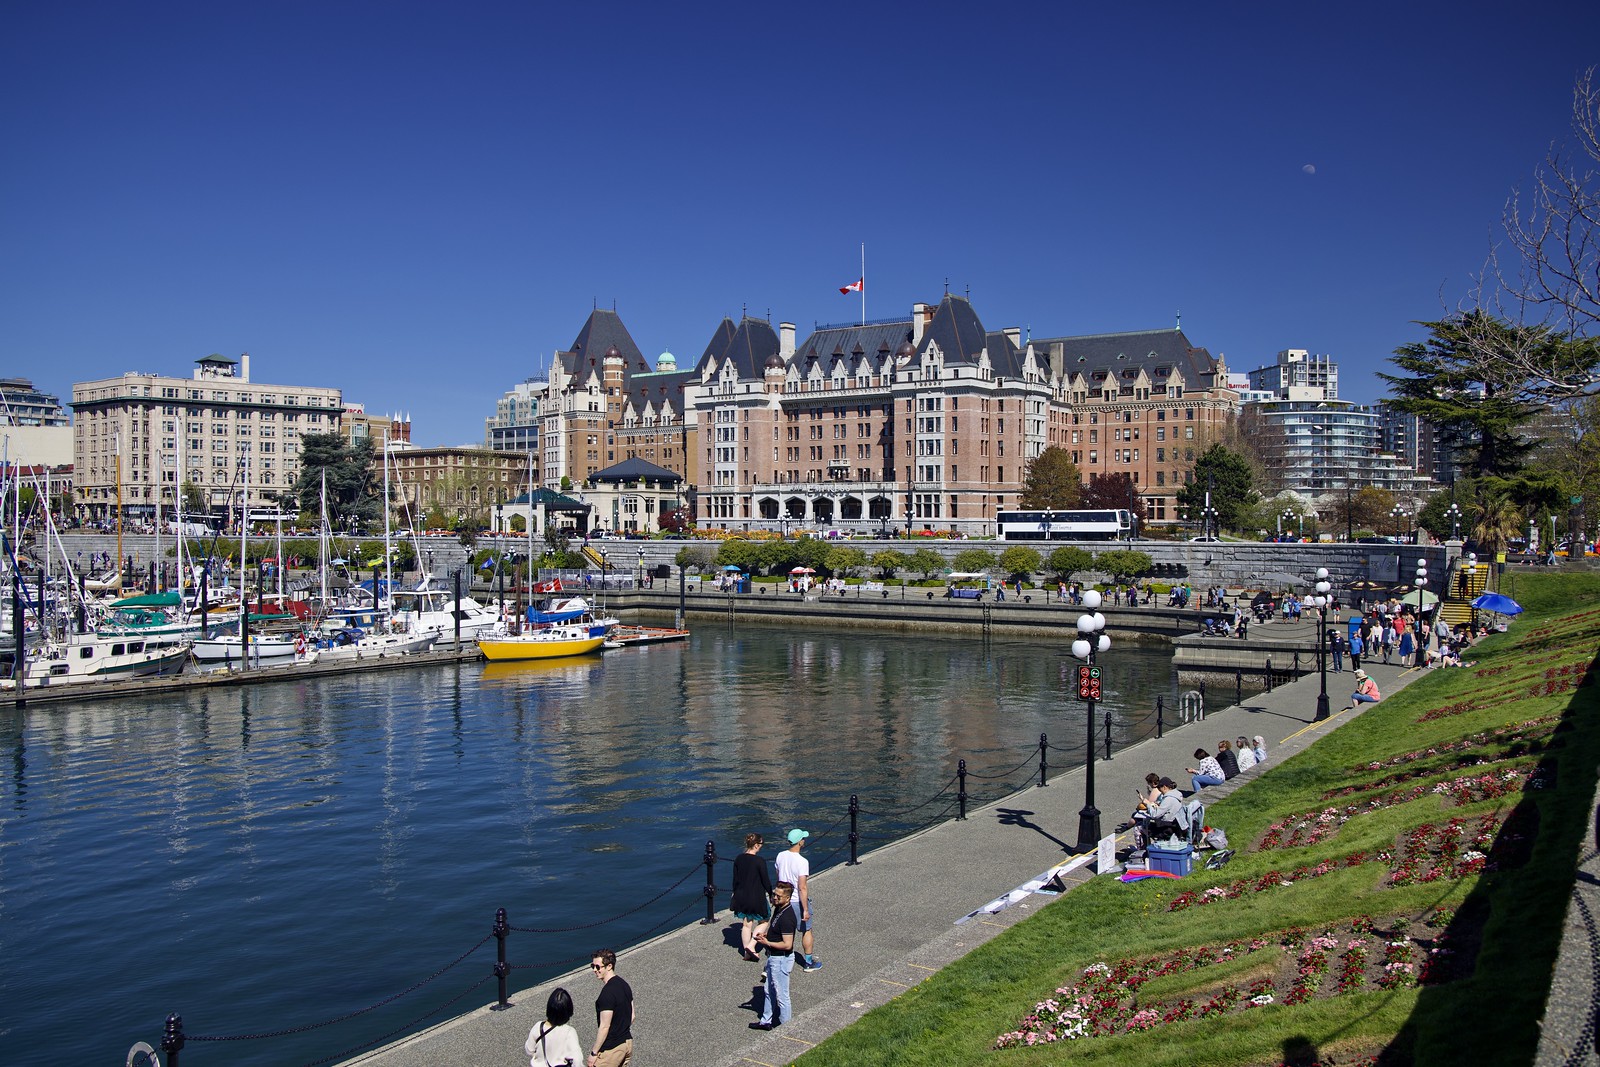 The Inner Harbour, Causeway and Empress Hotel